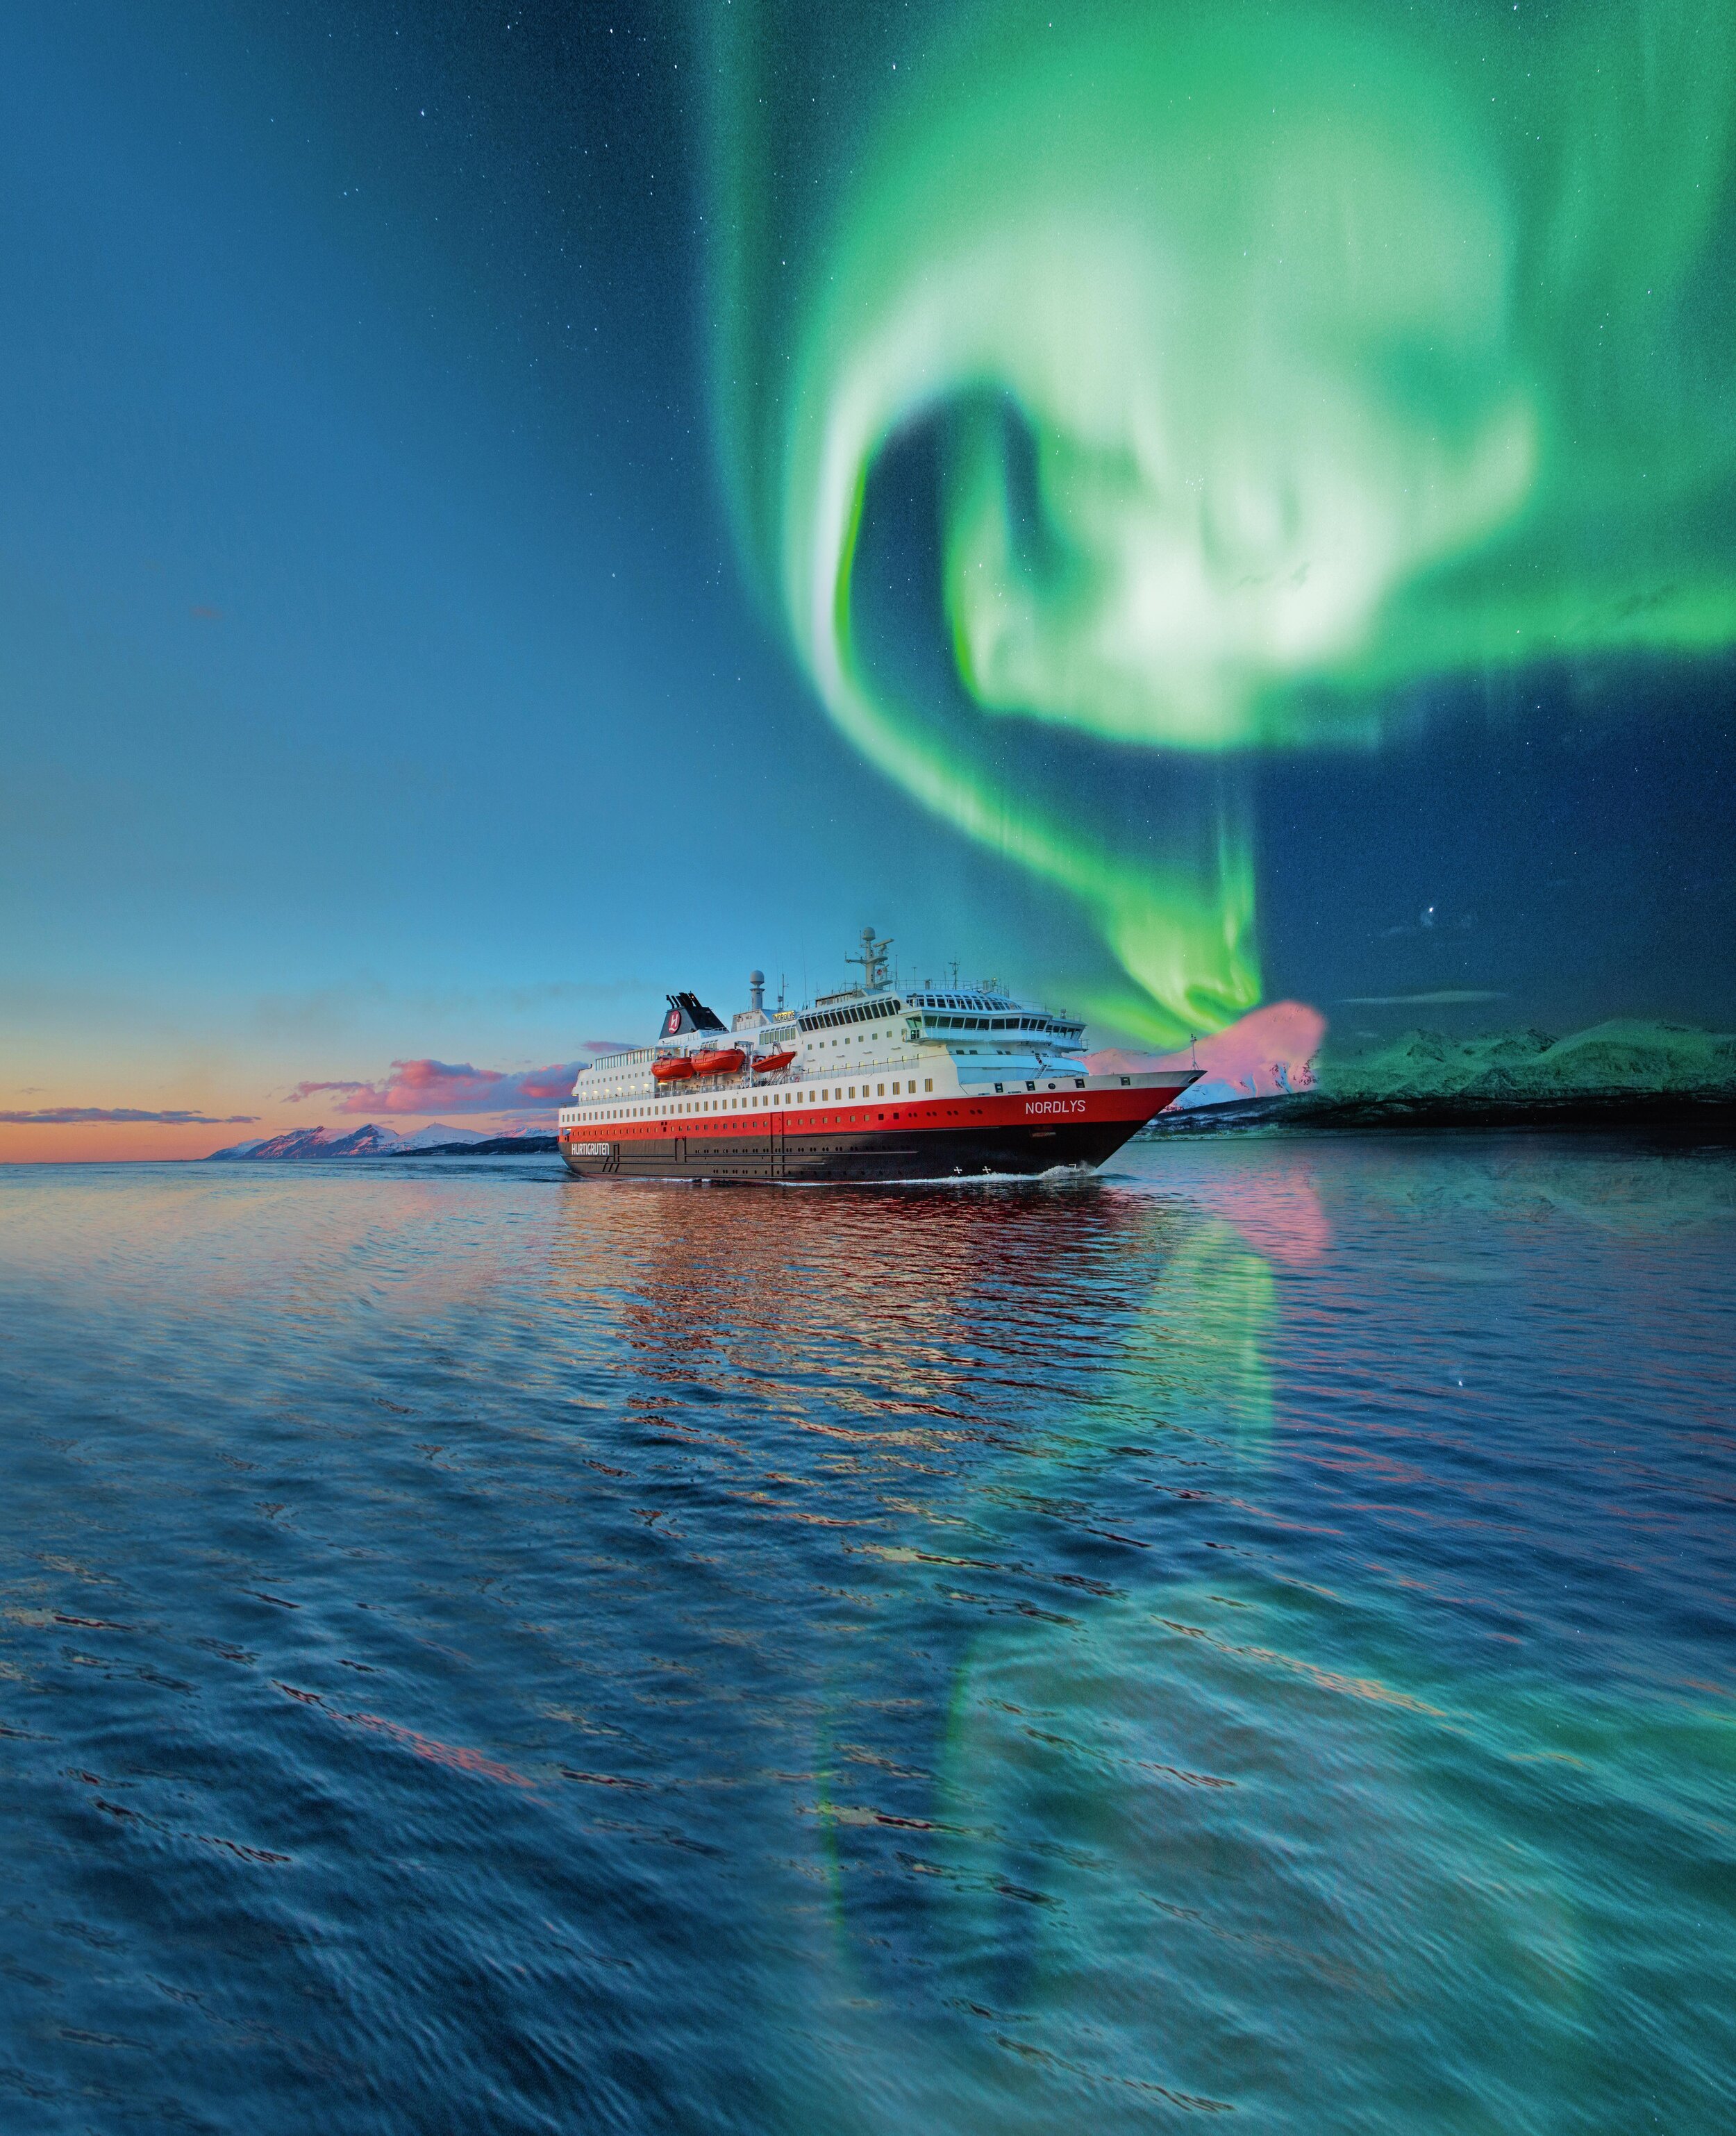 Member Introduction Hurtigruten A Sustainable Route To The Northern Lights Norwegian Chamber Of Commerce In Japan